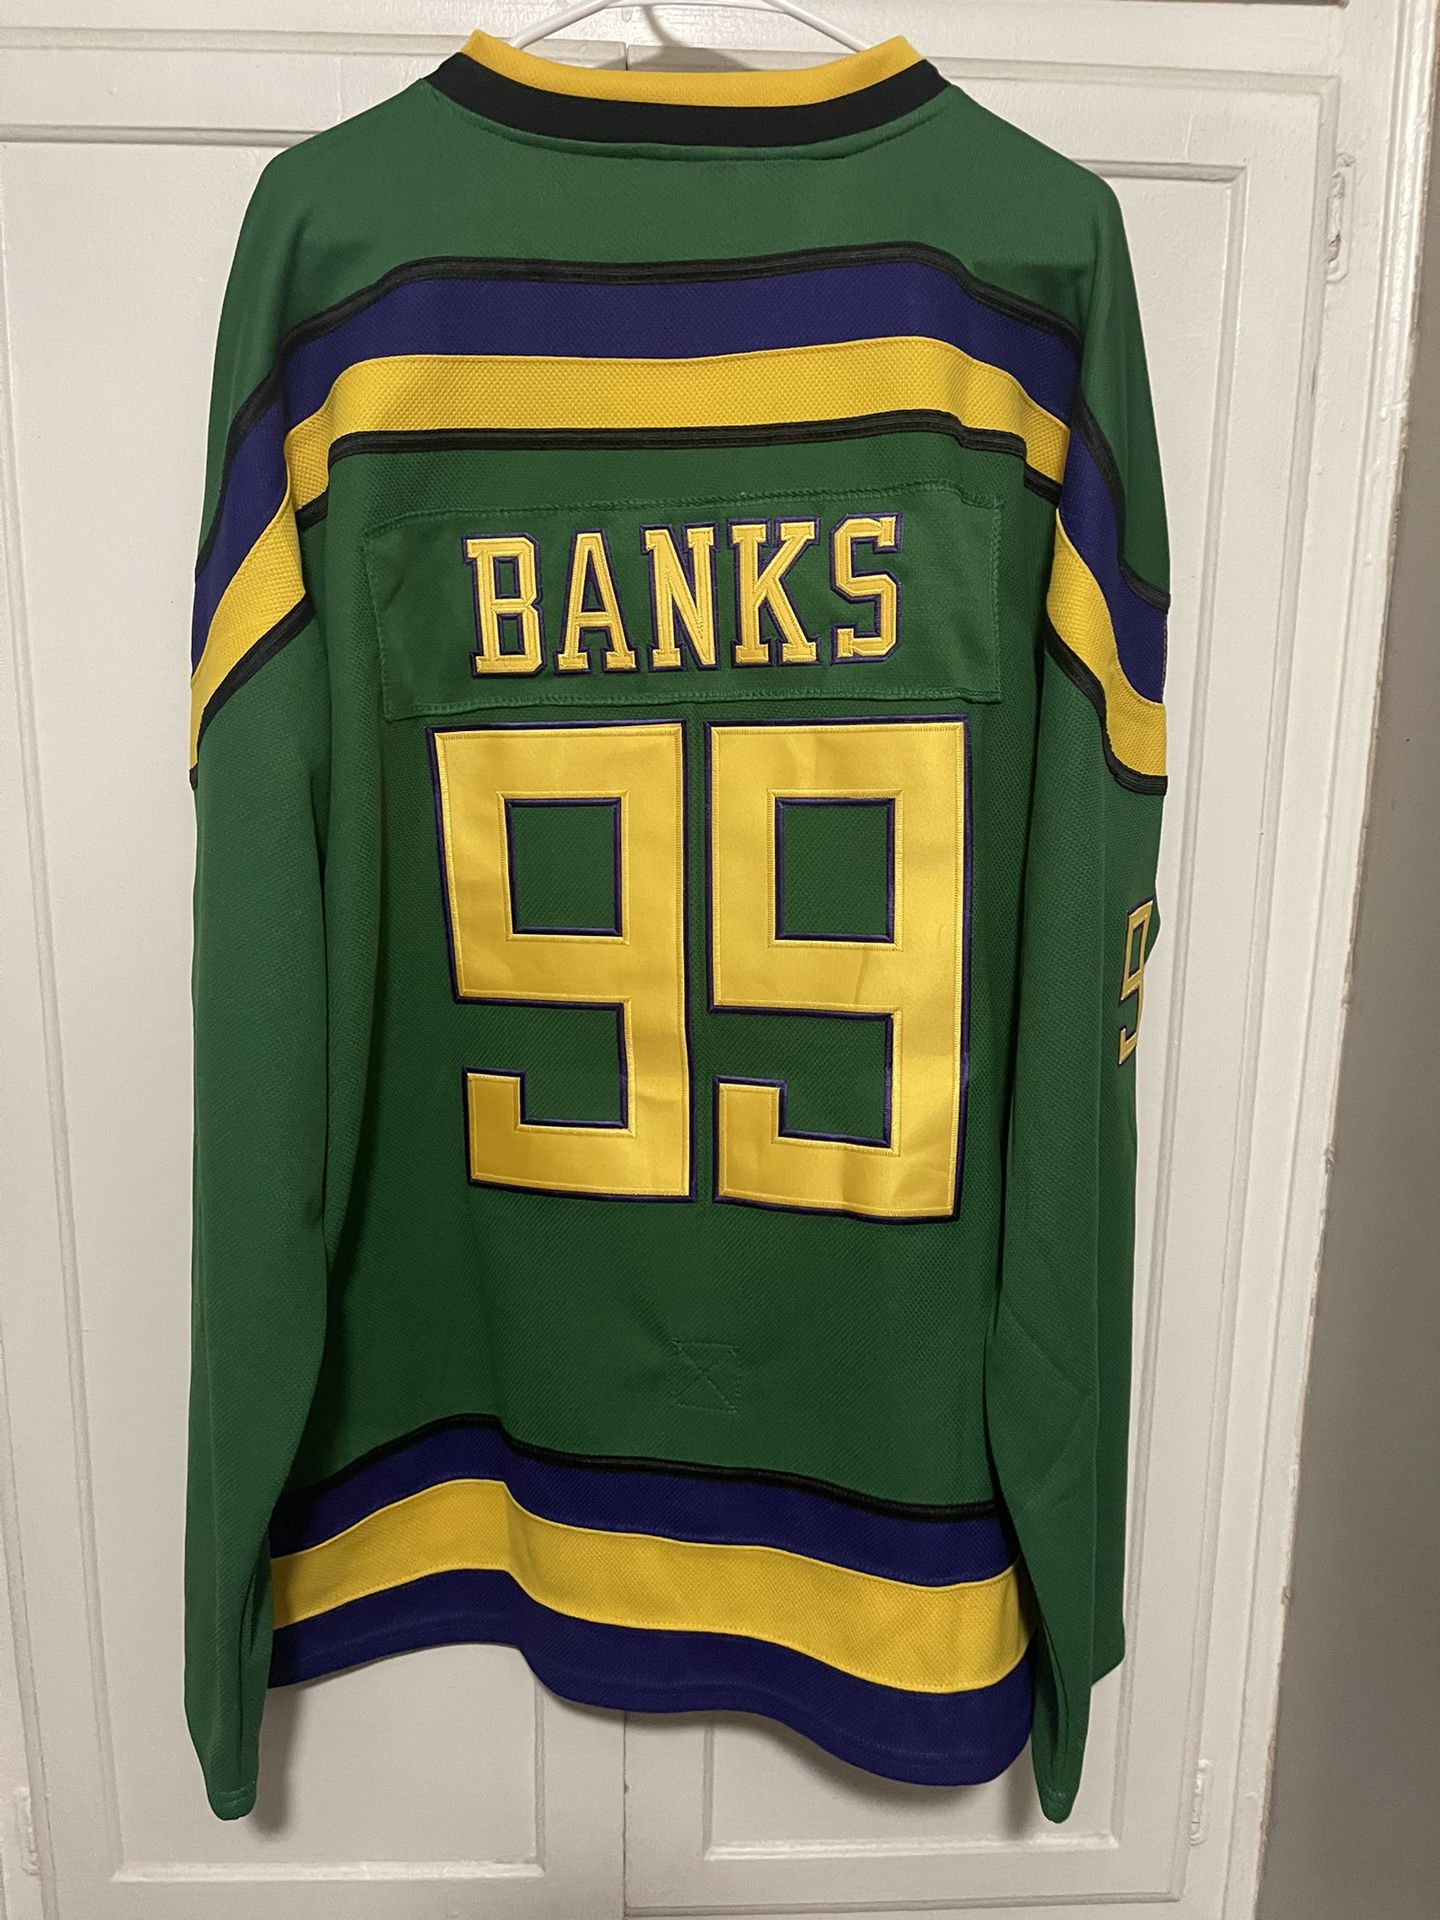 Mighty Ducks “Conway” Hockey Jersey for Sale in Concord, NC - OfferUp